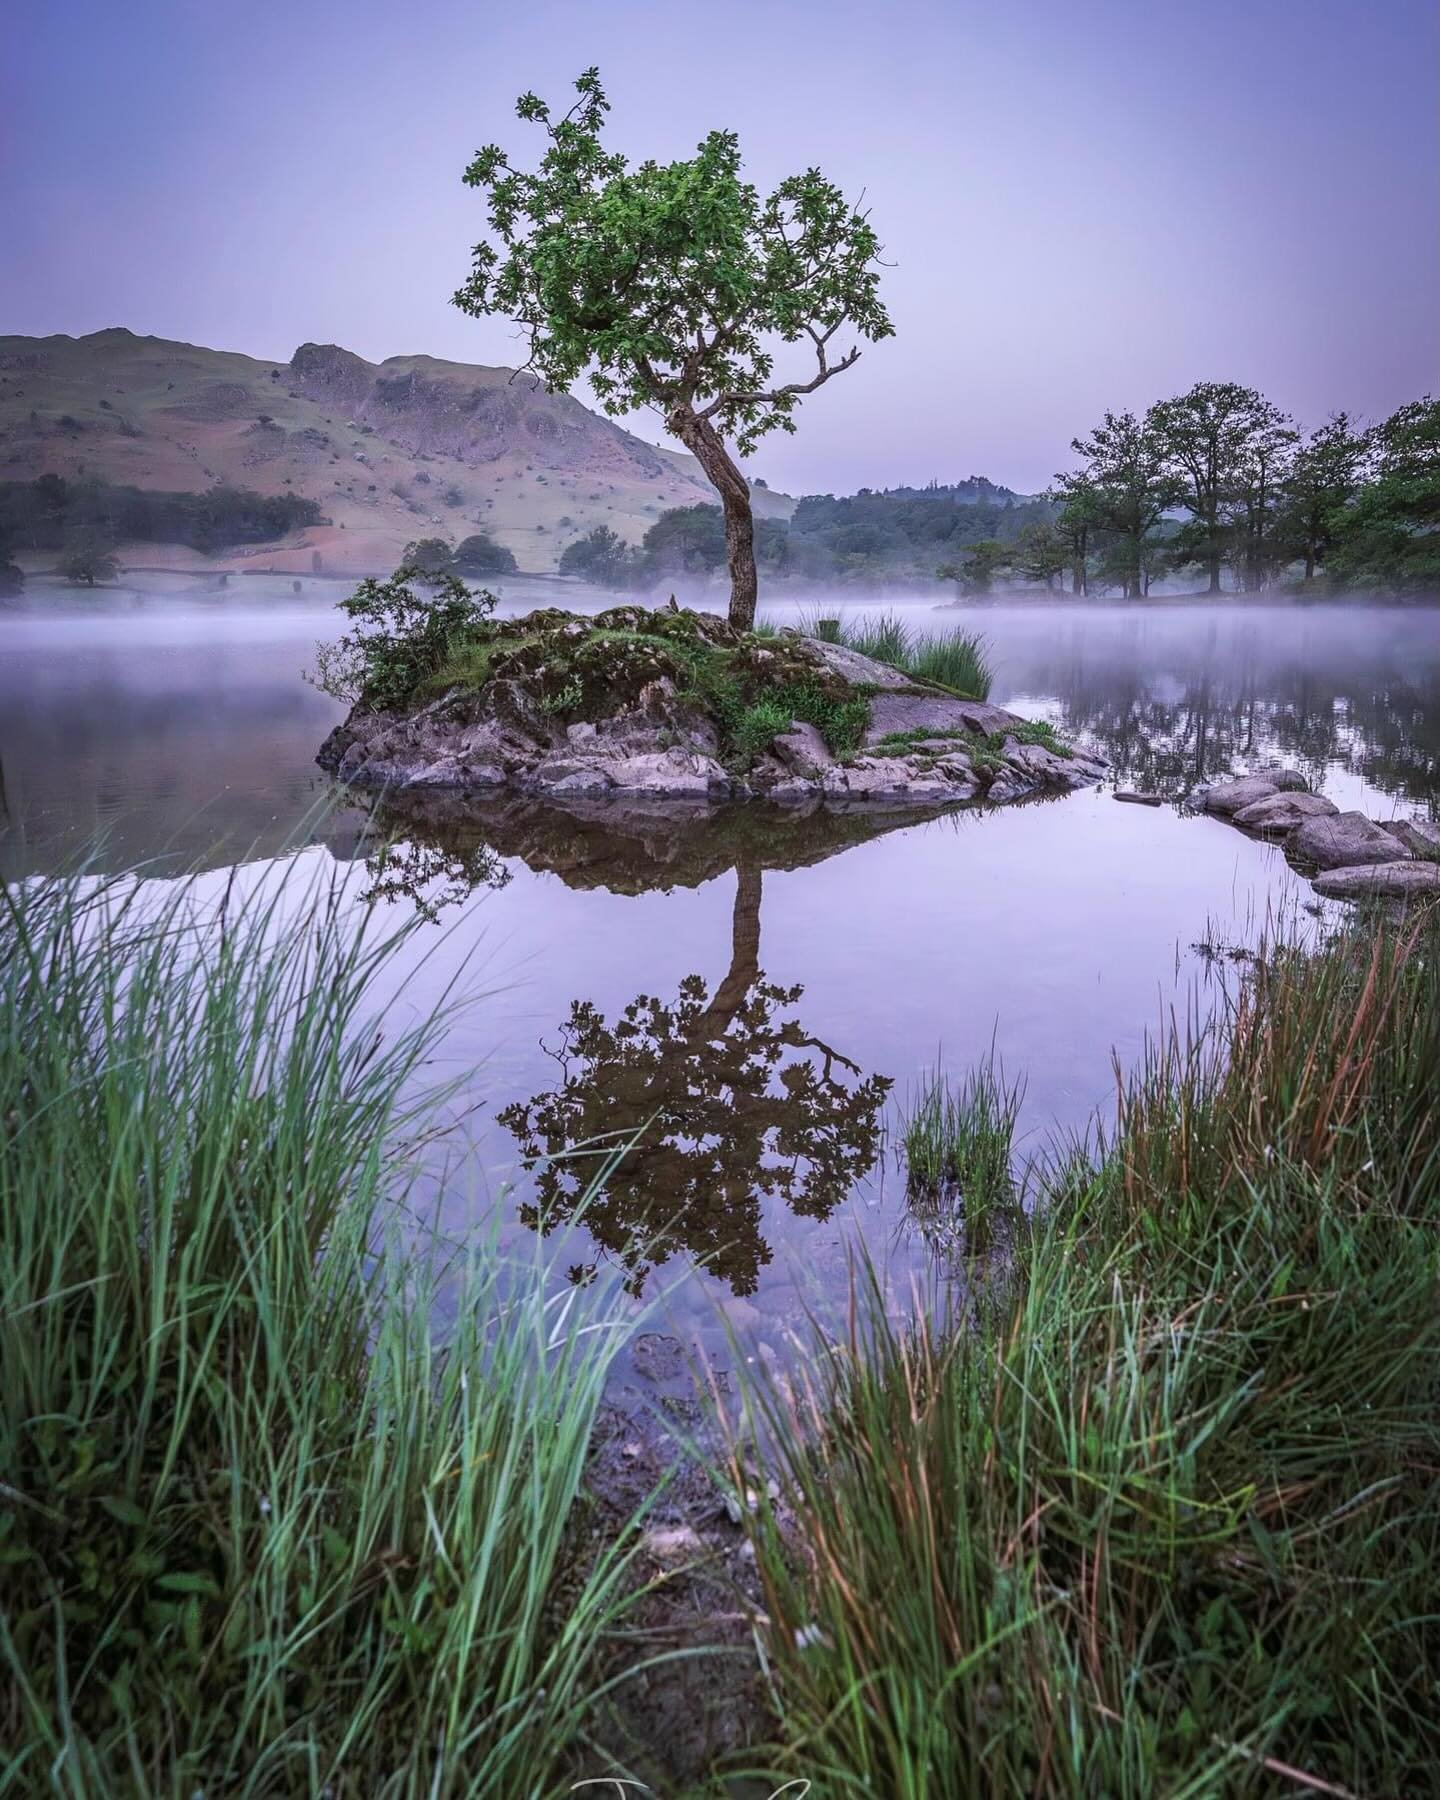 Rydal Mist
On the way to #Derwentwater for some reflections and mist when I came upon a lot of mist and just had to stop!! Always very boggy and hard to get a good reflection of this lone tree but I think this works well with background mist. 

laked